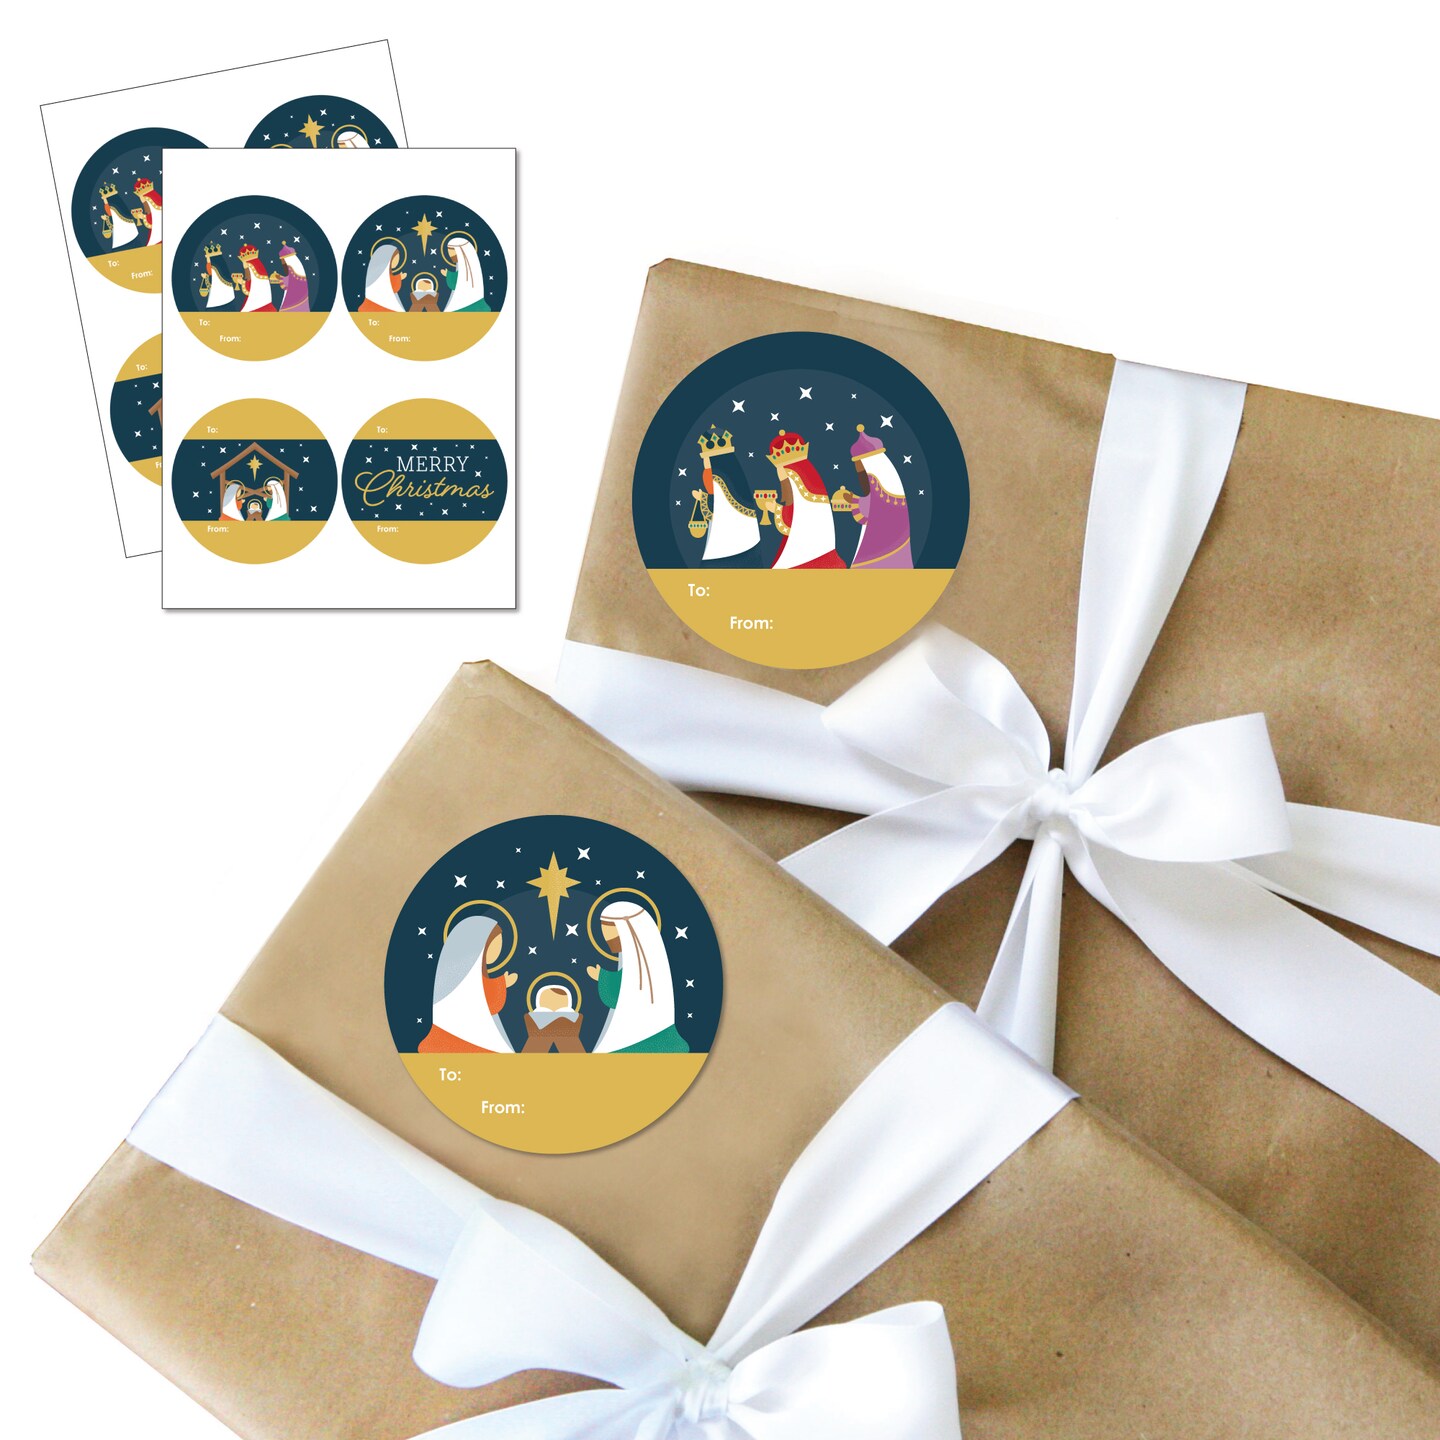 Big Dot of Happiness Holy Nativity - Round Manger Scene Religious Christmas To and From Gift Tags - Large Stickers - Set of 8